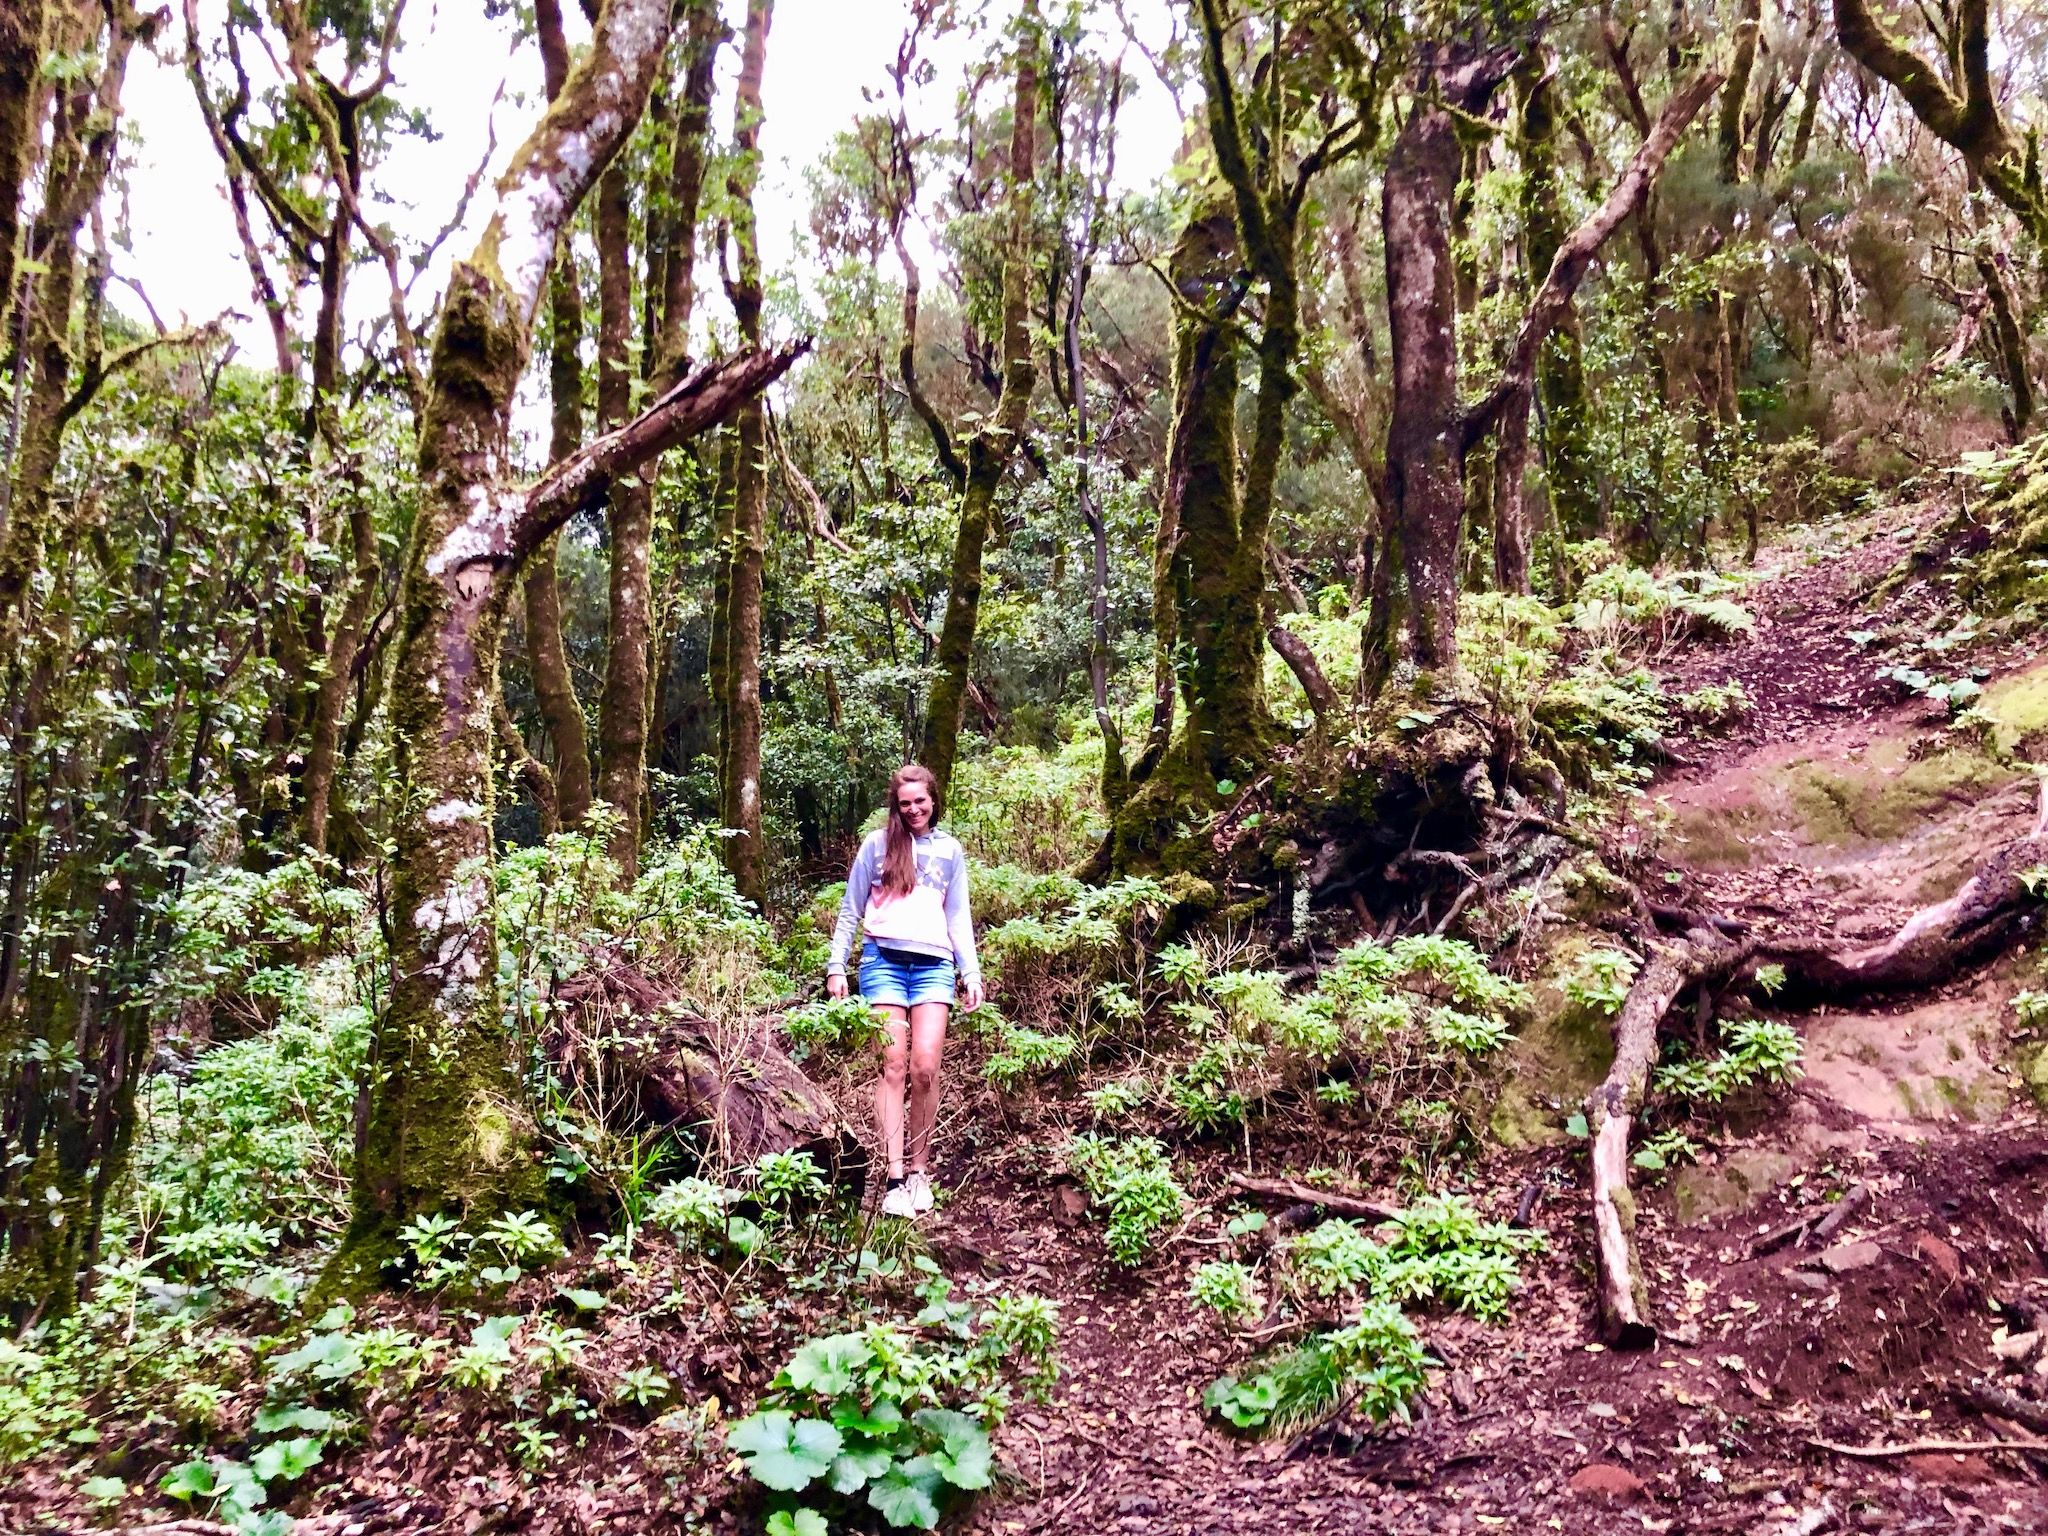 In the forest of the Anaga mountains you can go for a wonderful hike. Photo: Sascha Tegtmeyer